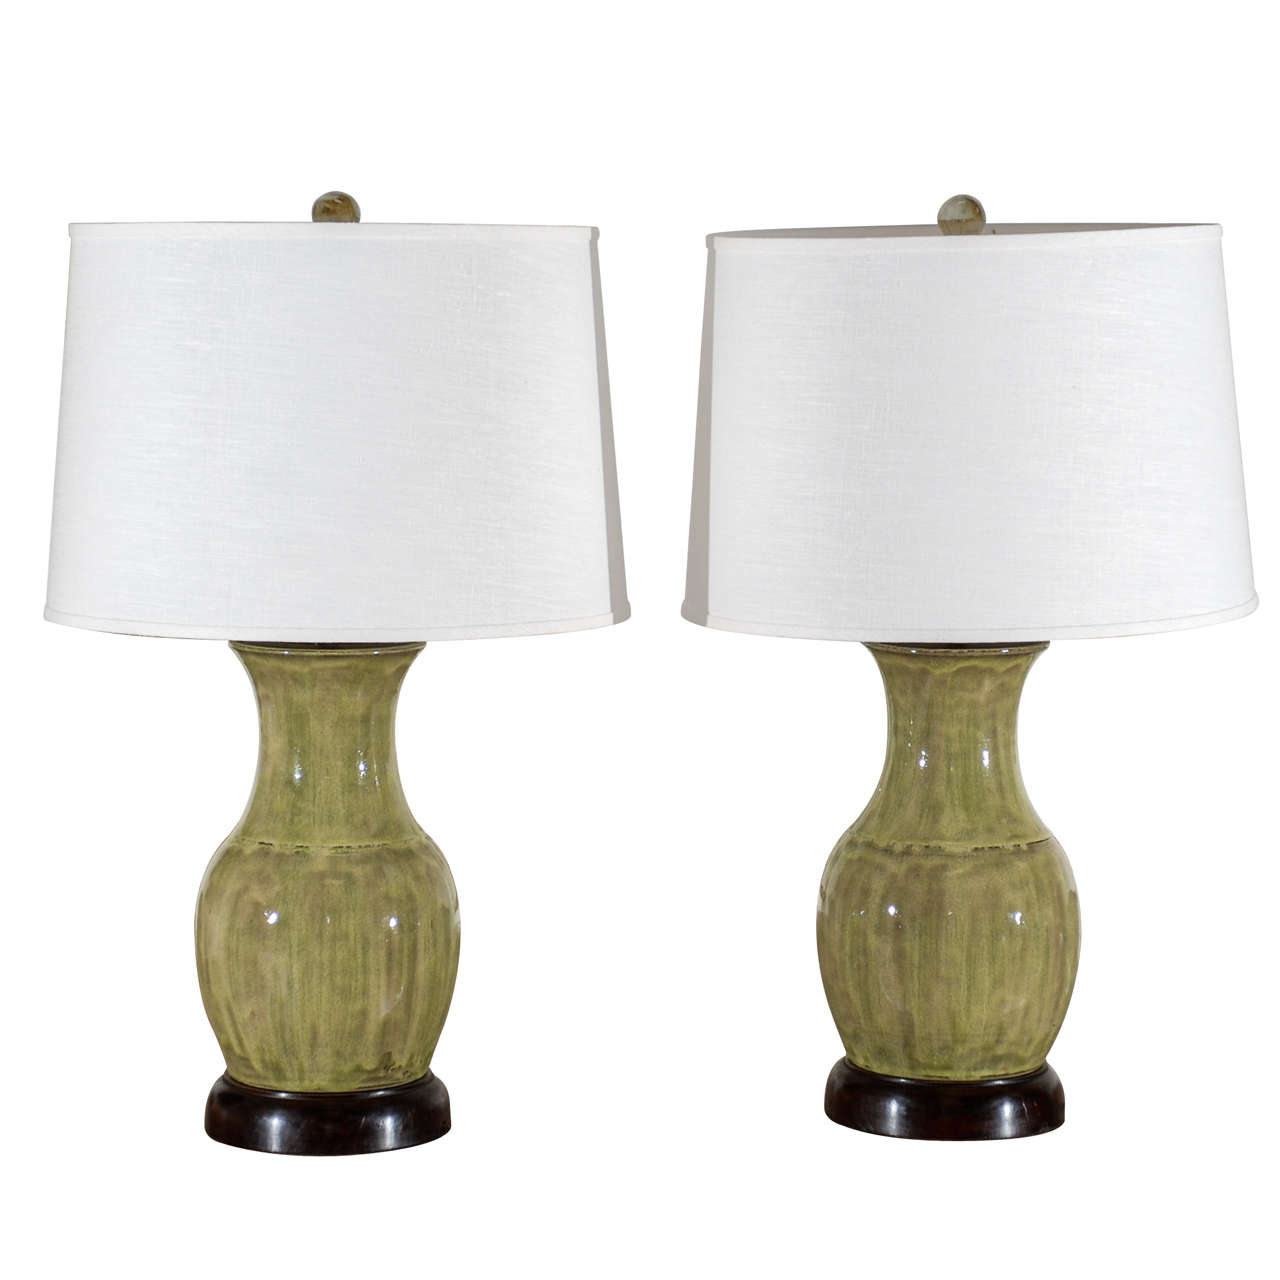 Original Hand Turned Lamps by North Georgia Potter at 1stdibs